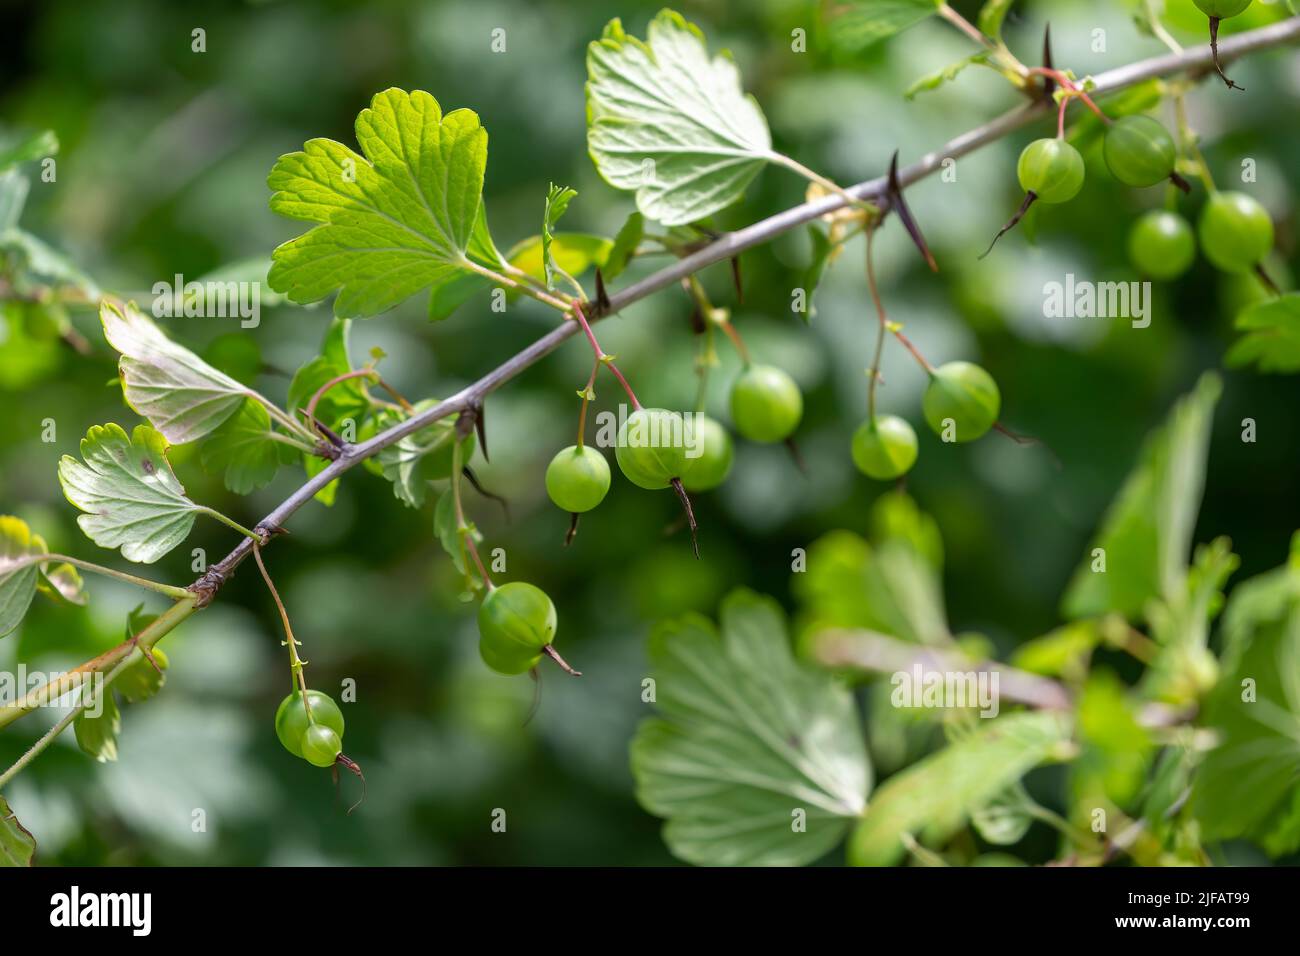 Ribes uva-crispa, Wild Gooseberry known as gooseberry or European gooseberry, is a species of flowering shrub in the currant family, Grossulariaceae. Stock Photo